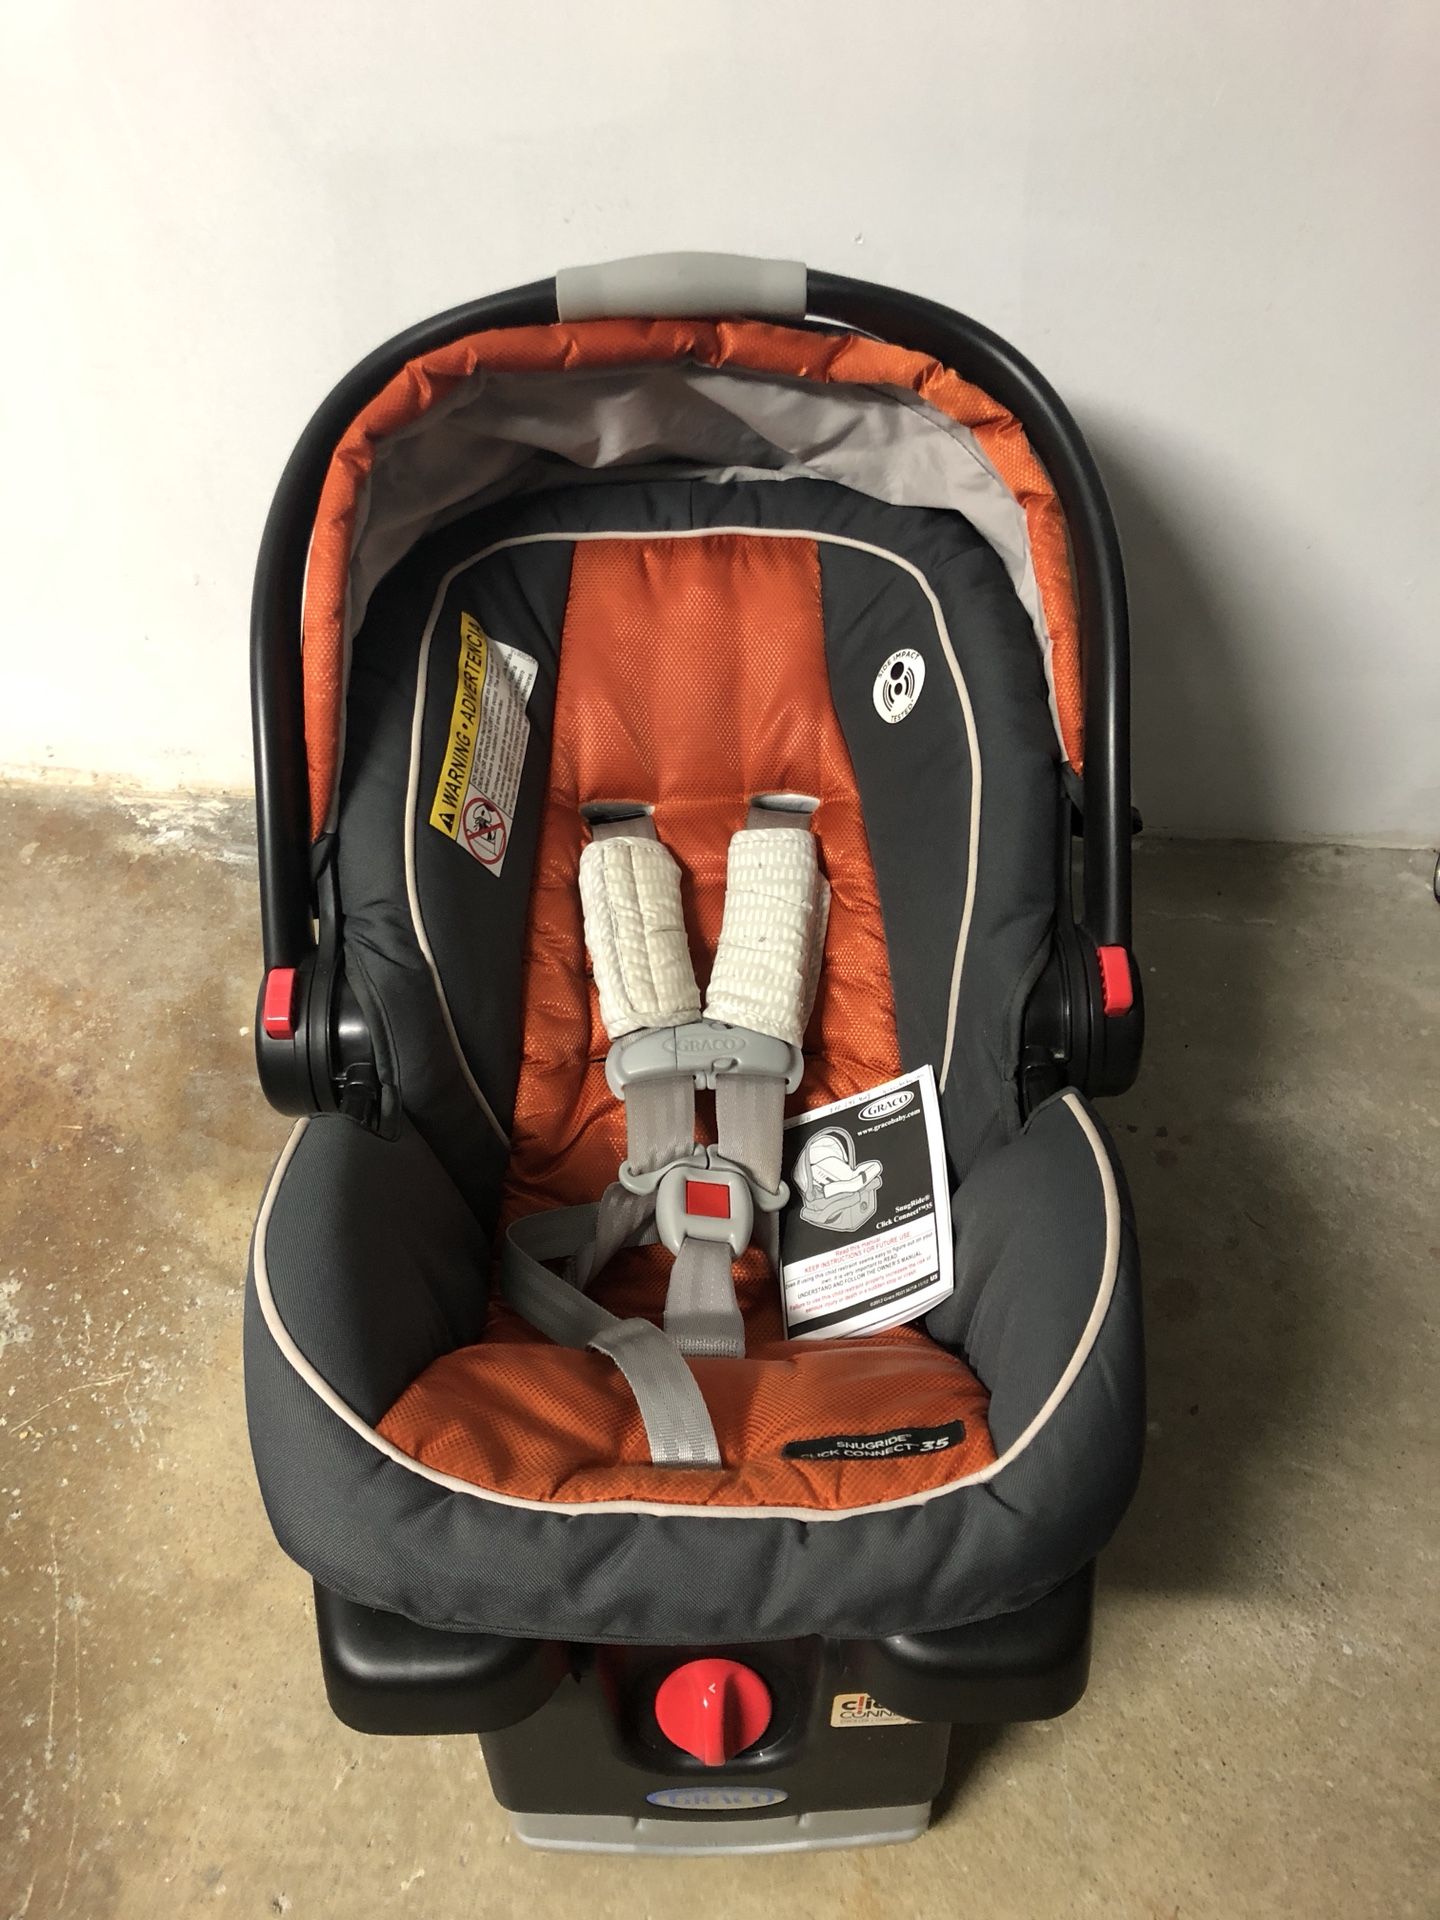 Graco click connect 35 car seat and Snap-n-Go Stroller